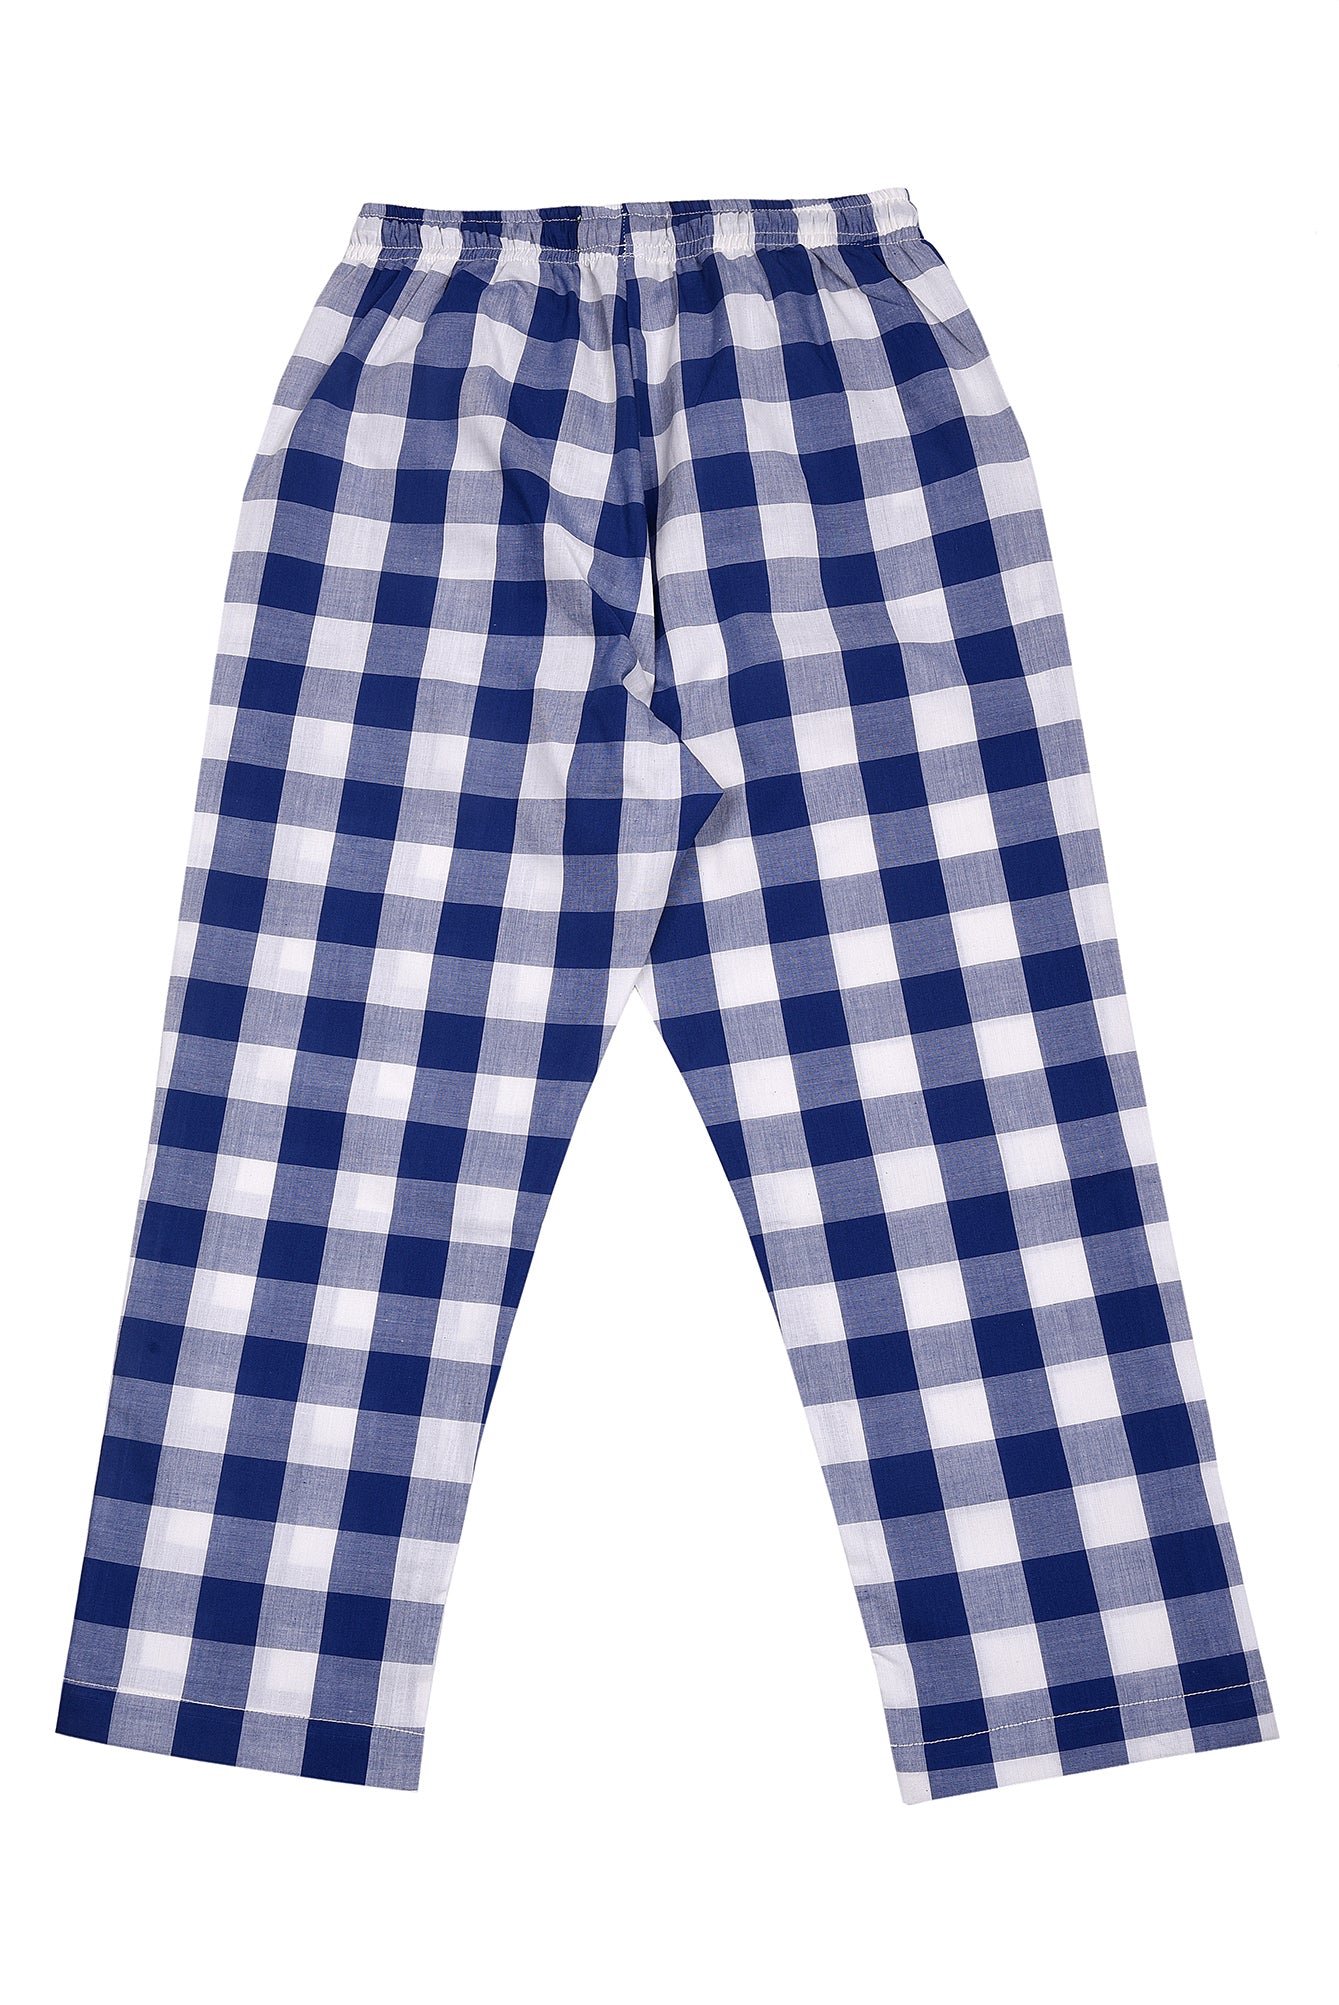 KDS-B-13161 PULL ON TROUSER BLUE CHECK